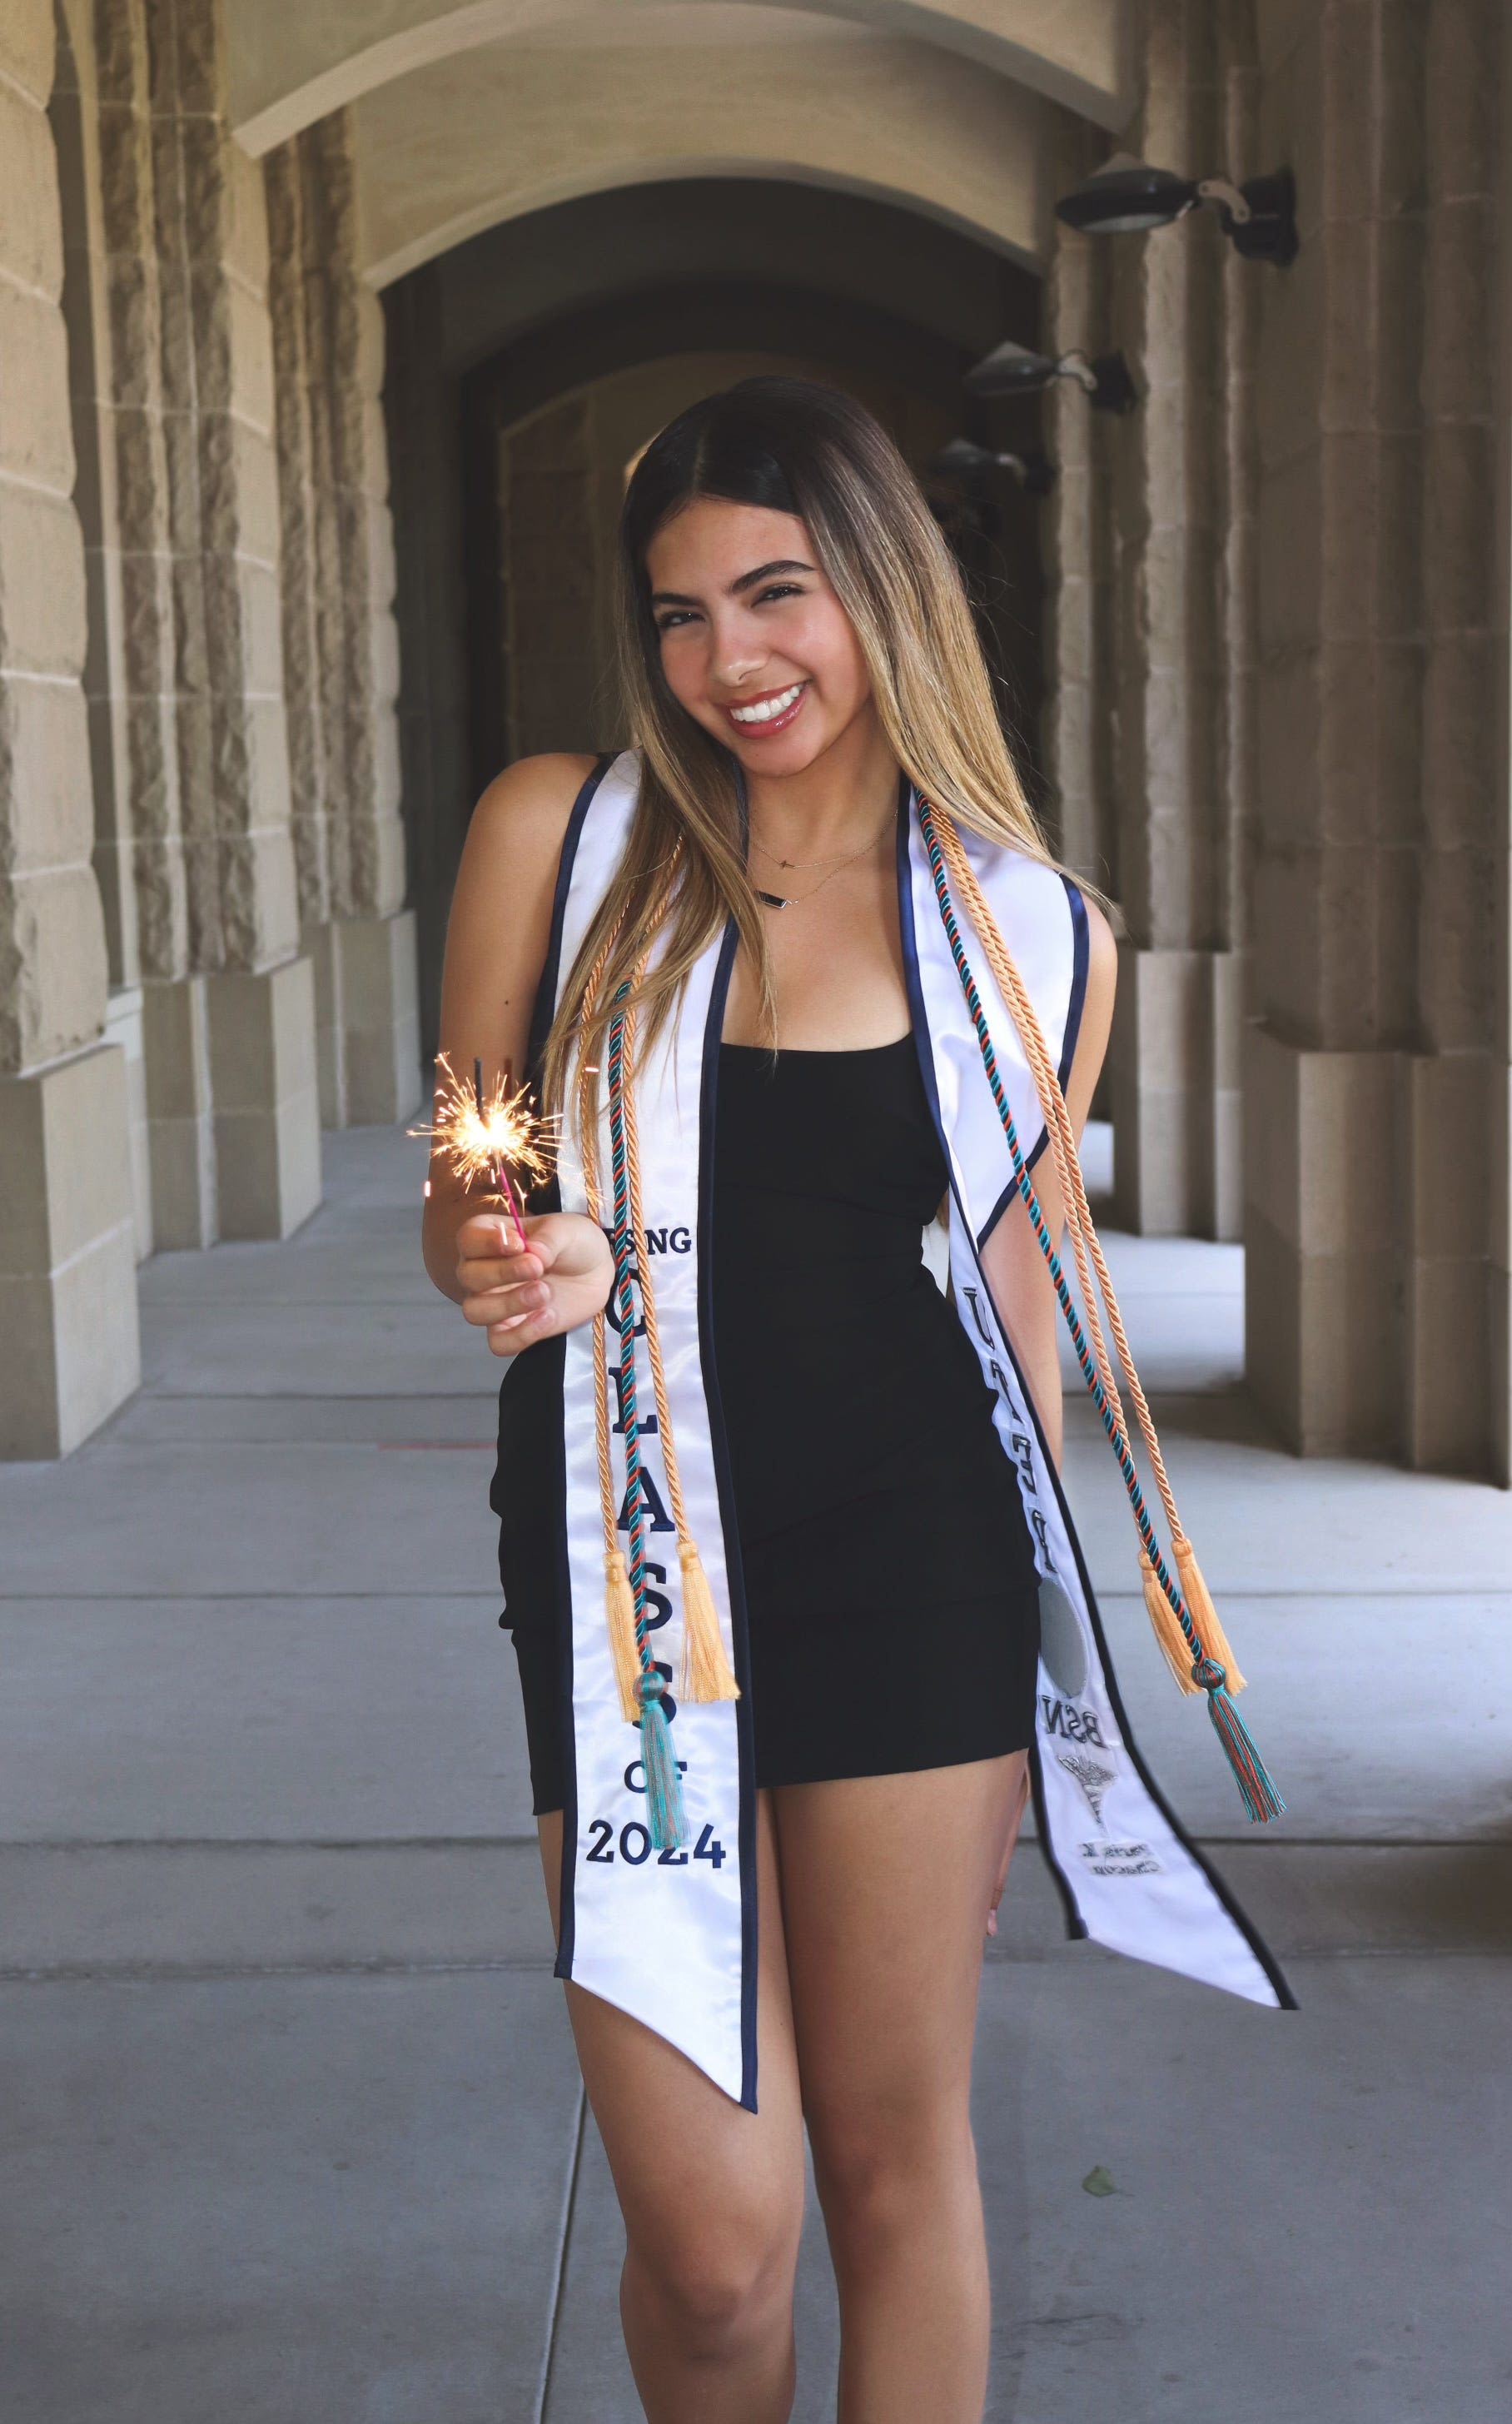 Young El Pasoan balances high school and college to achieve nursing degree from UTEP